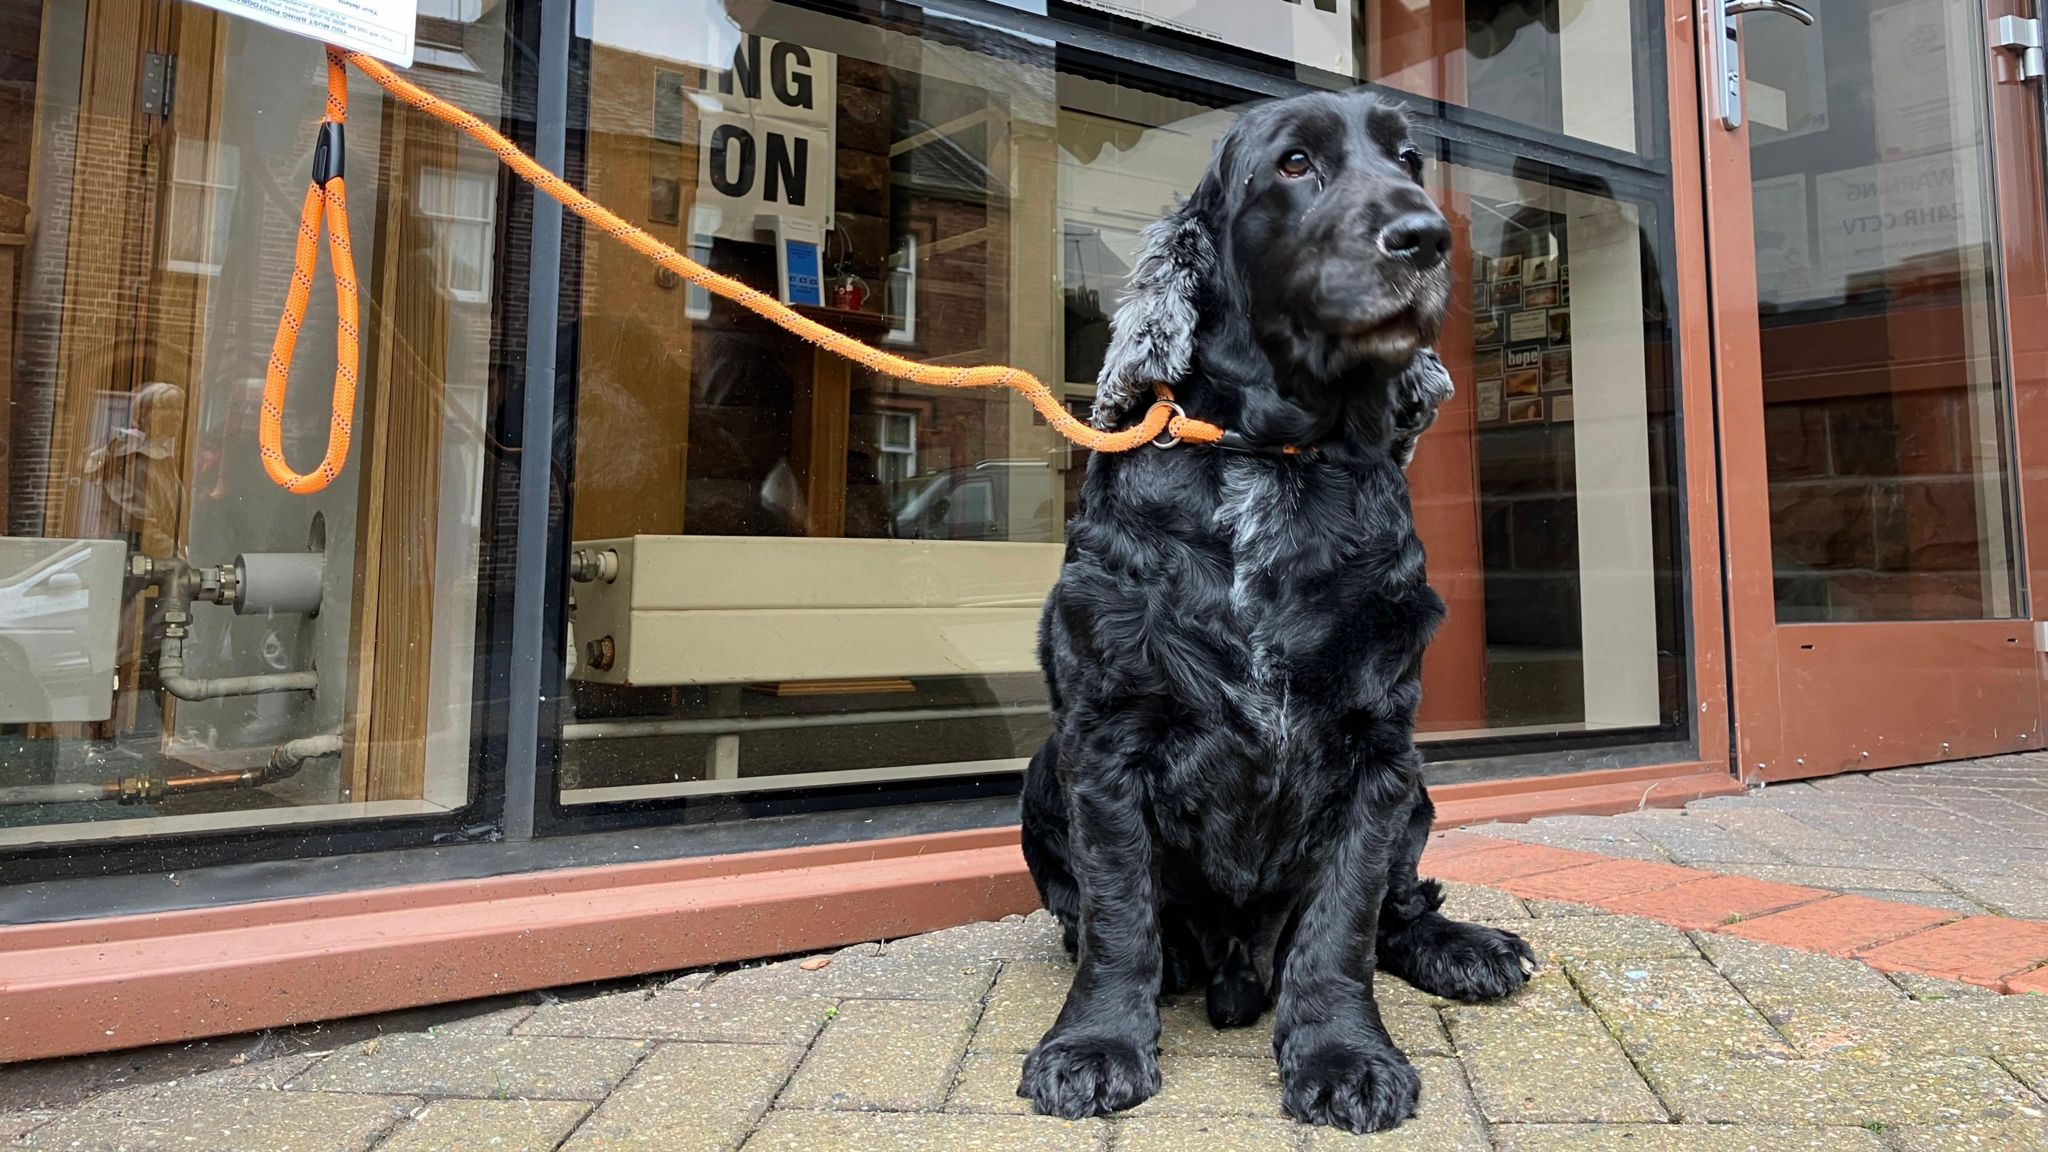 A black dog waits on a lead outside a polling station in Penrith, Cumbria